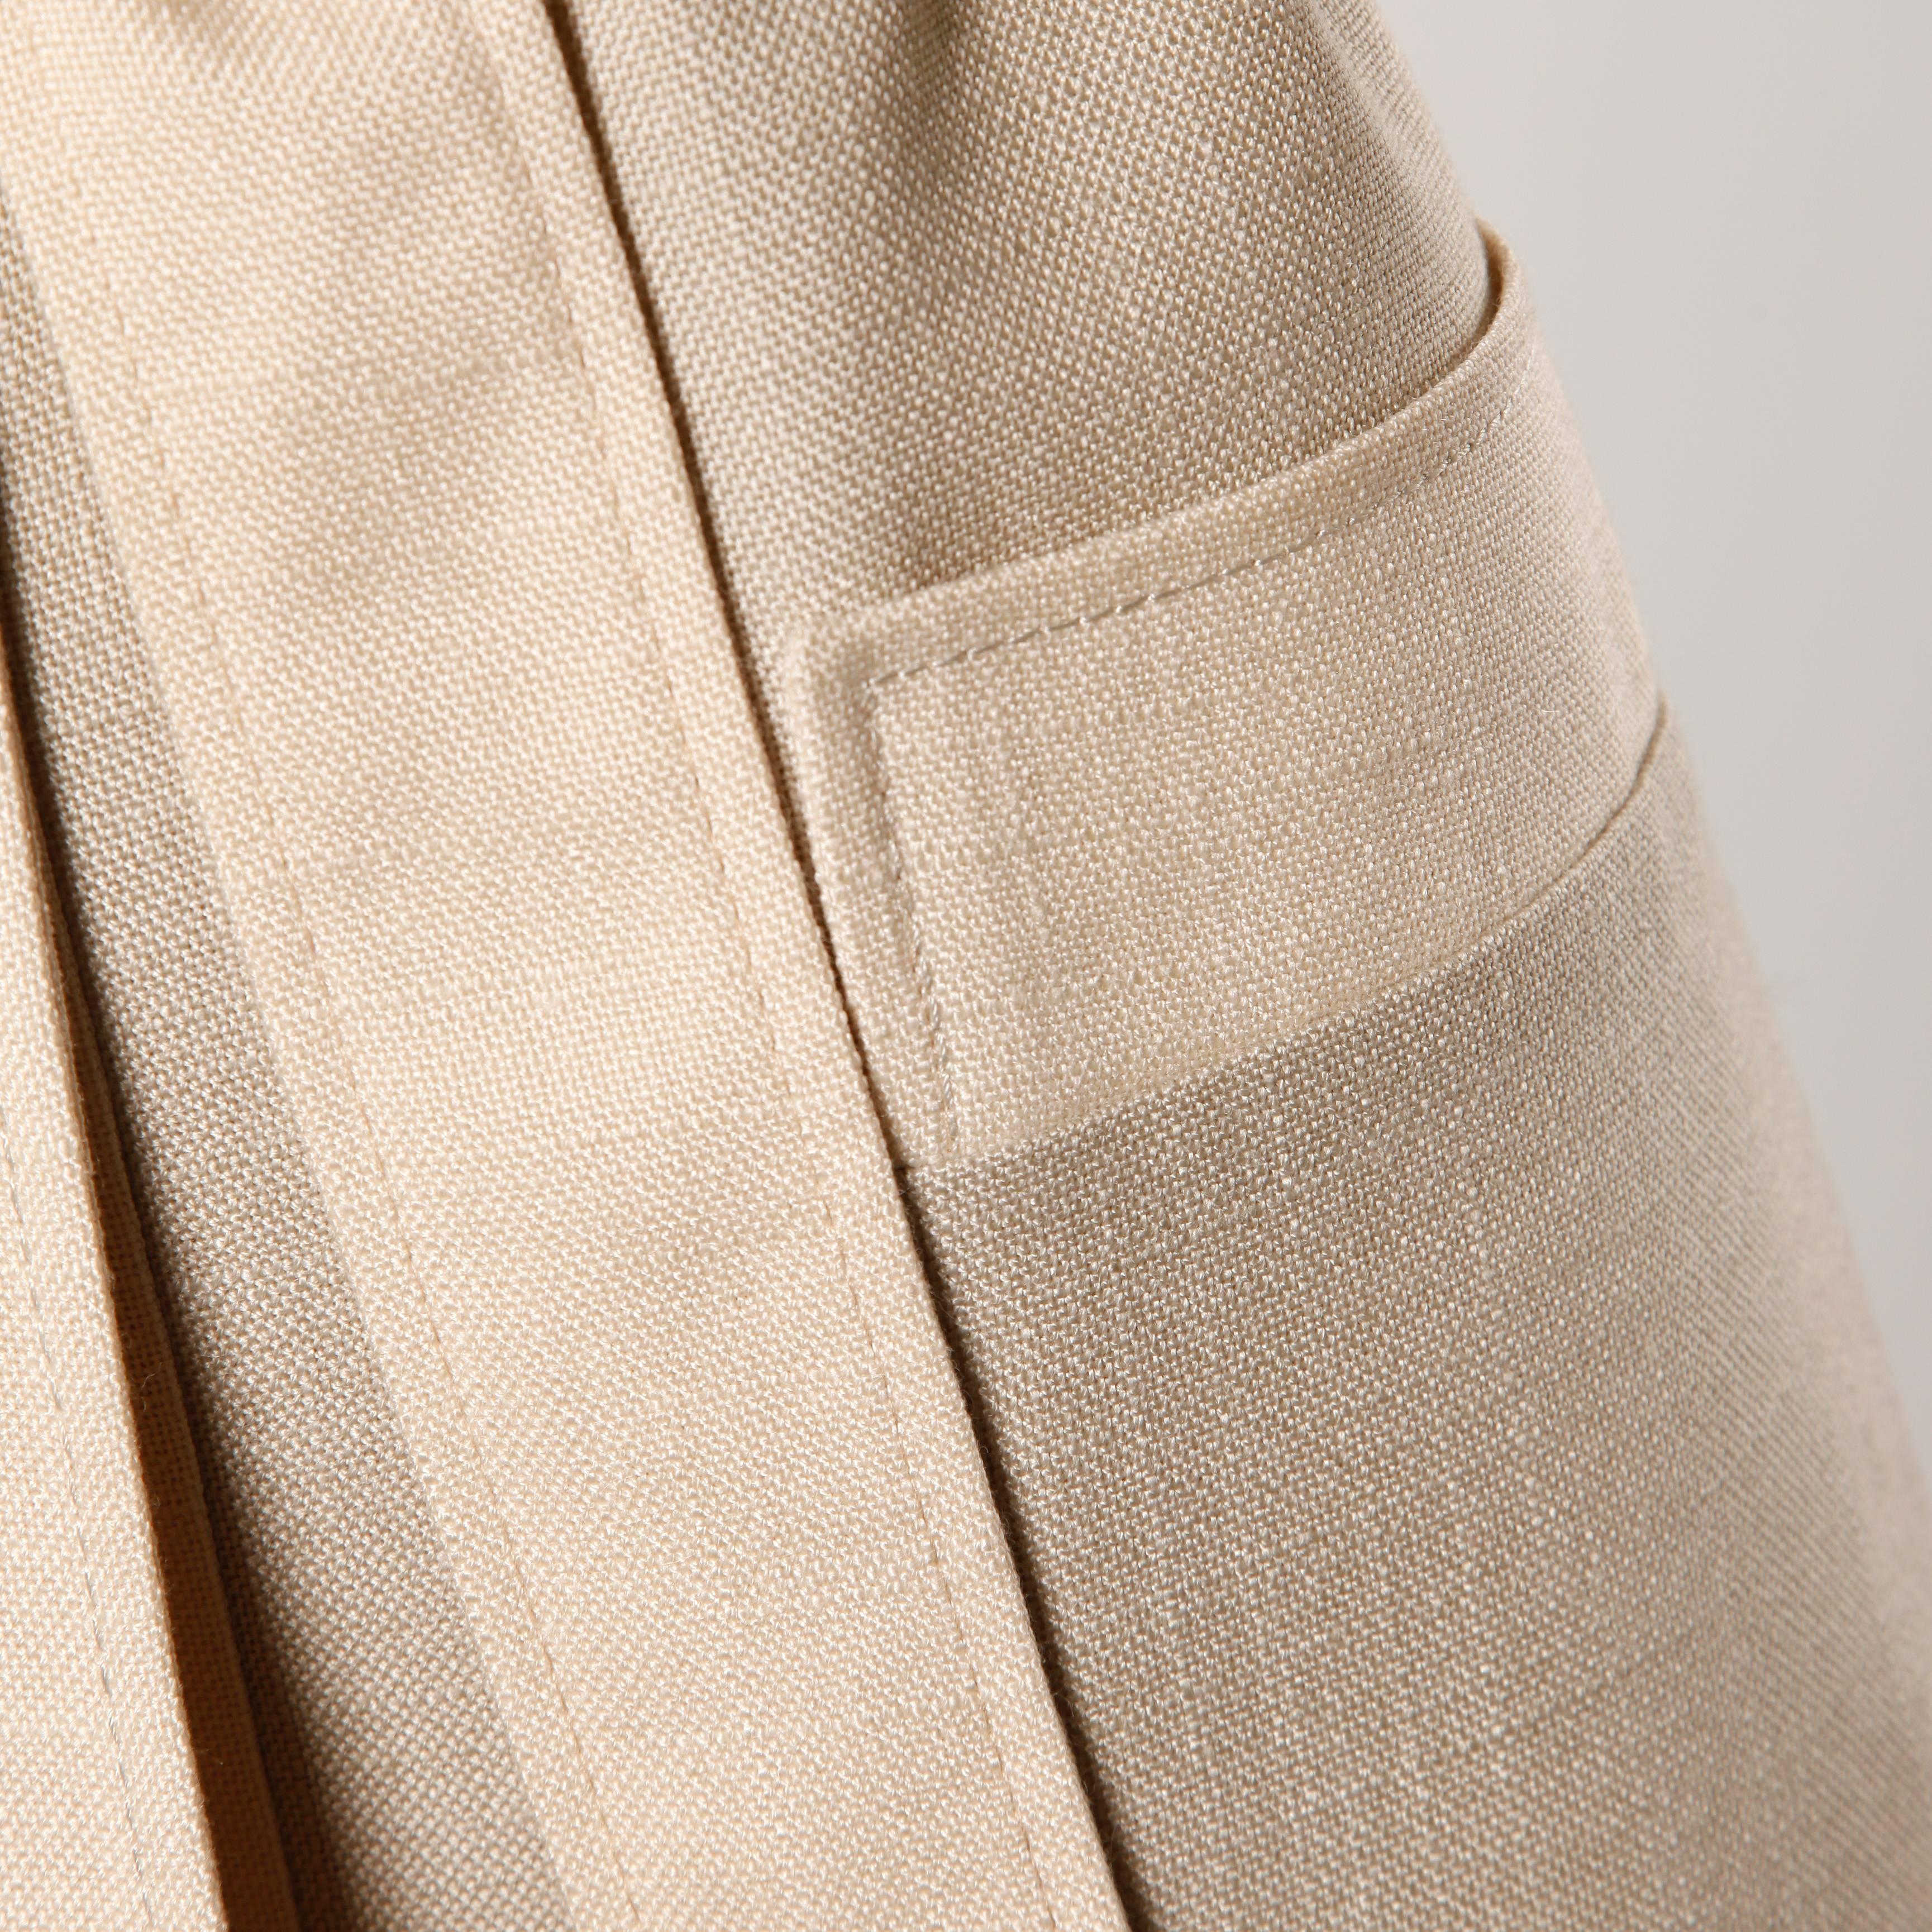 Chic minimalist two tone light weight coat with matching sash by Don Simonelli.

Details: 

Fully Lined
Front Pockets
Tie at Waist Closure
Estimated Size: Small-Medium
Color: Beige/ Tan
Fabric: Feels like Linen Blend
Label: Modelia/ Don